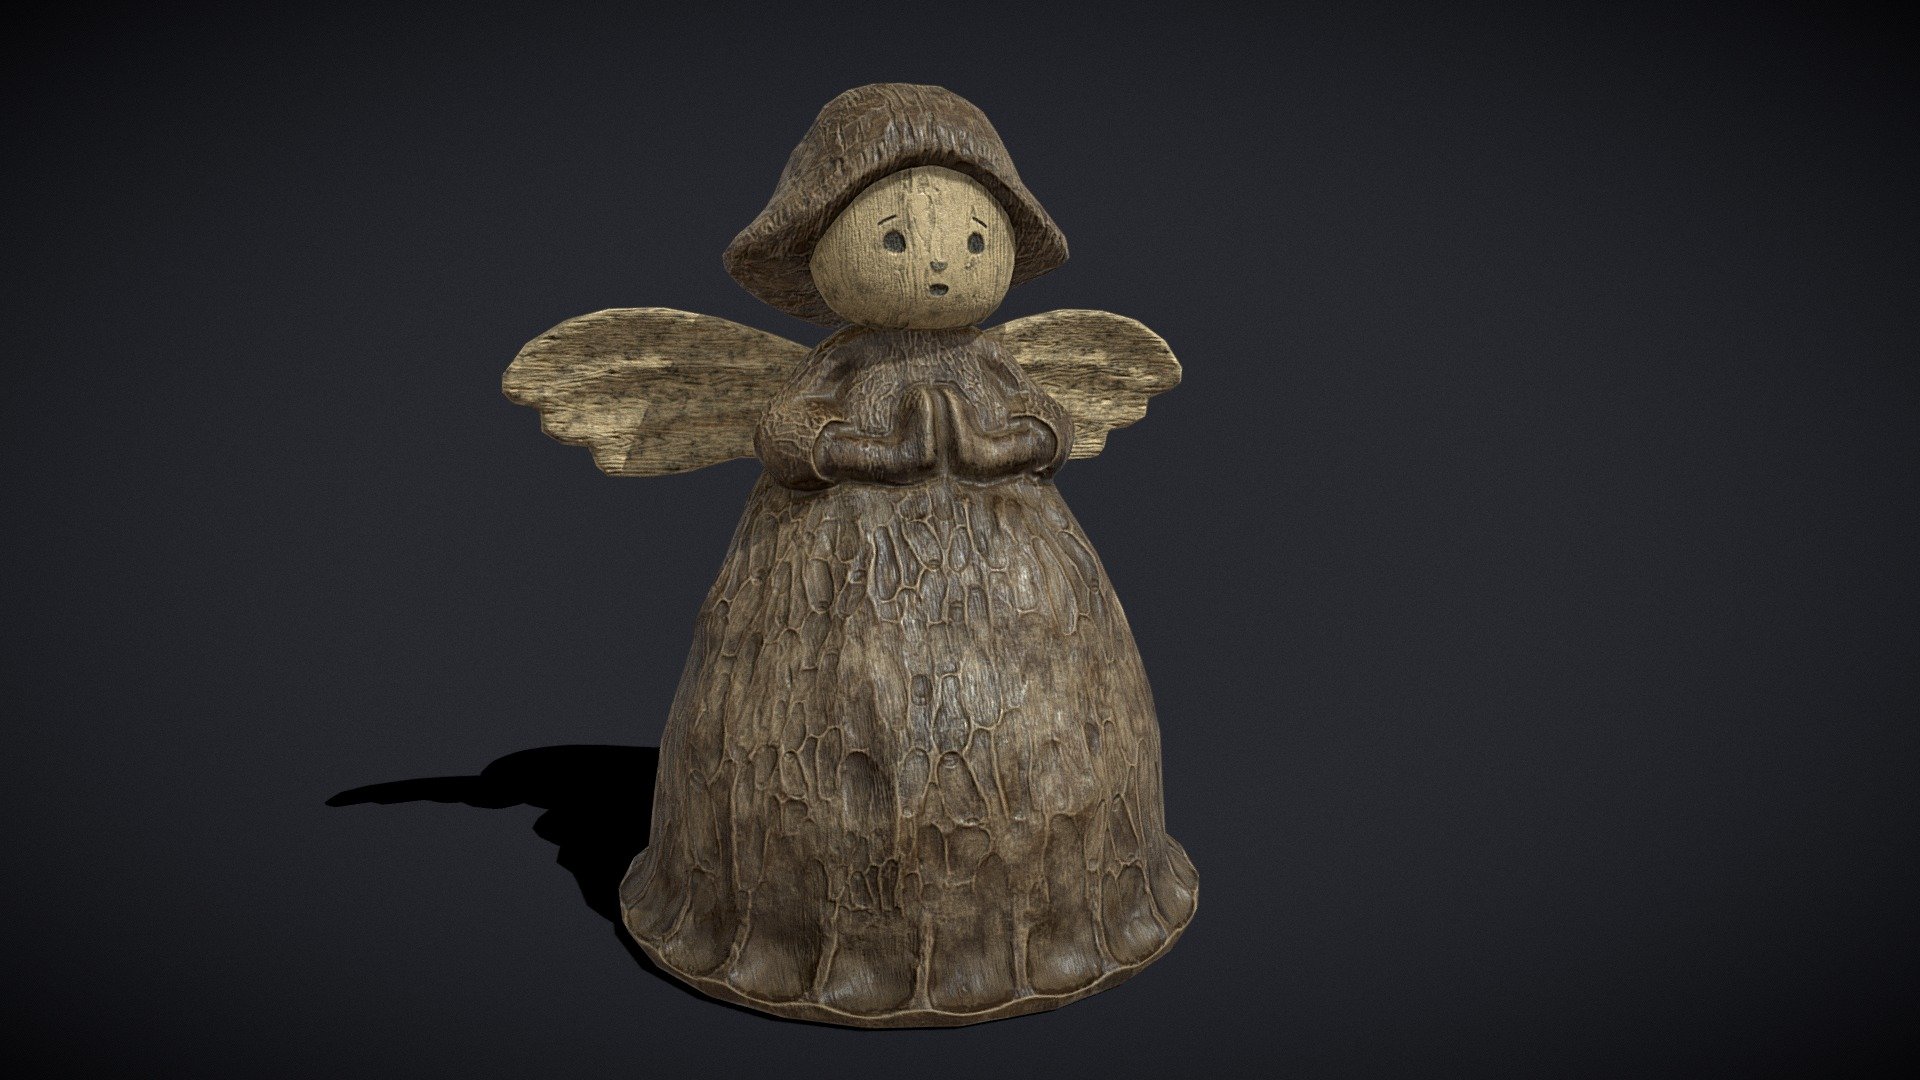 Angel Wood Figurine
VR / AR / Low-poly
PBR approved
Geometry Polygon mesh
Polygons 2,258
Vertices 2,205
Textures 4K
Materials 1 - Angel Wood Figurine - Buy Royalty Free 3D model by GetDeadEntertainment 3d model